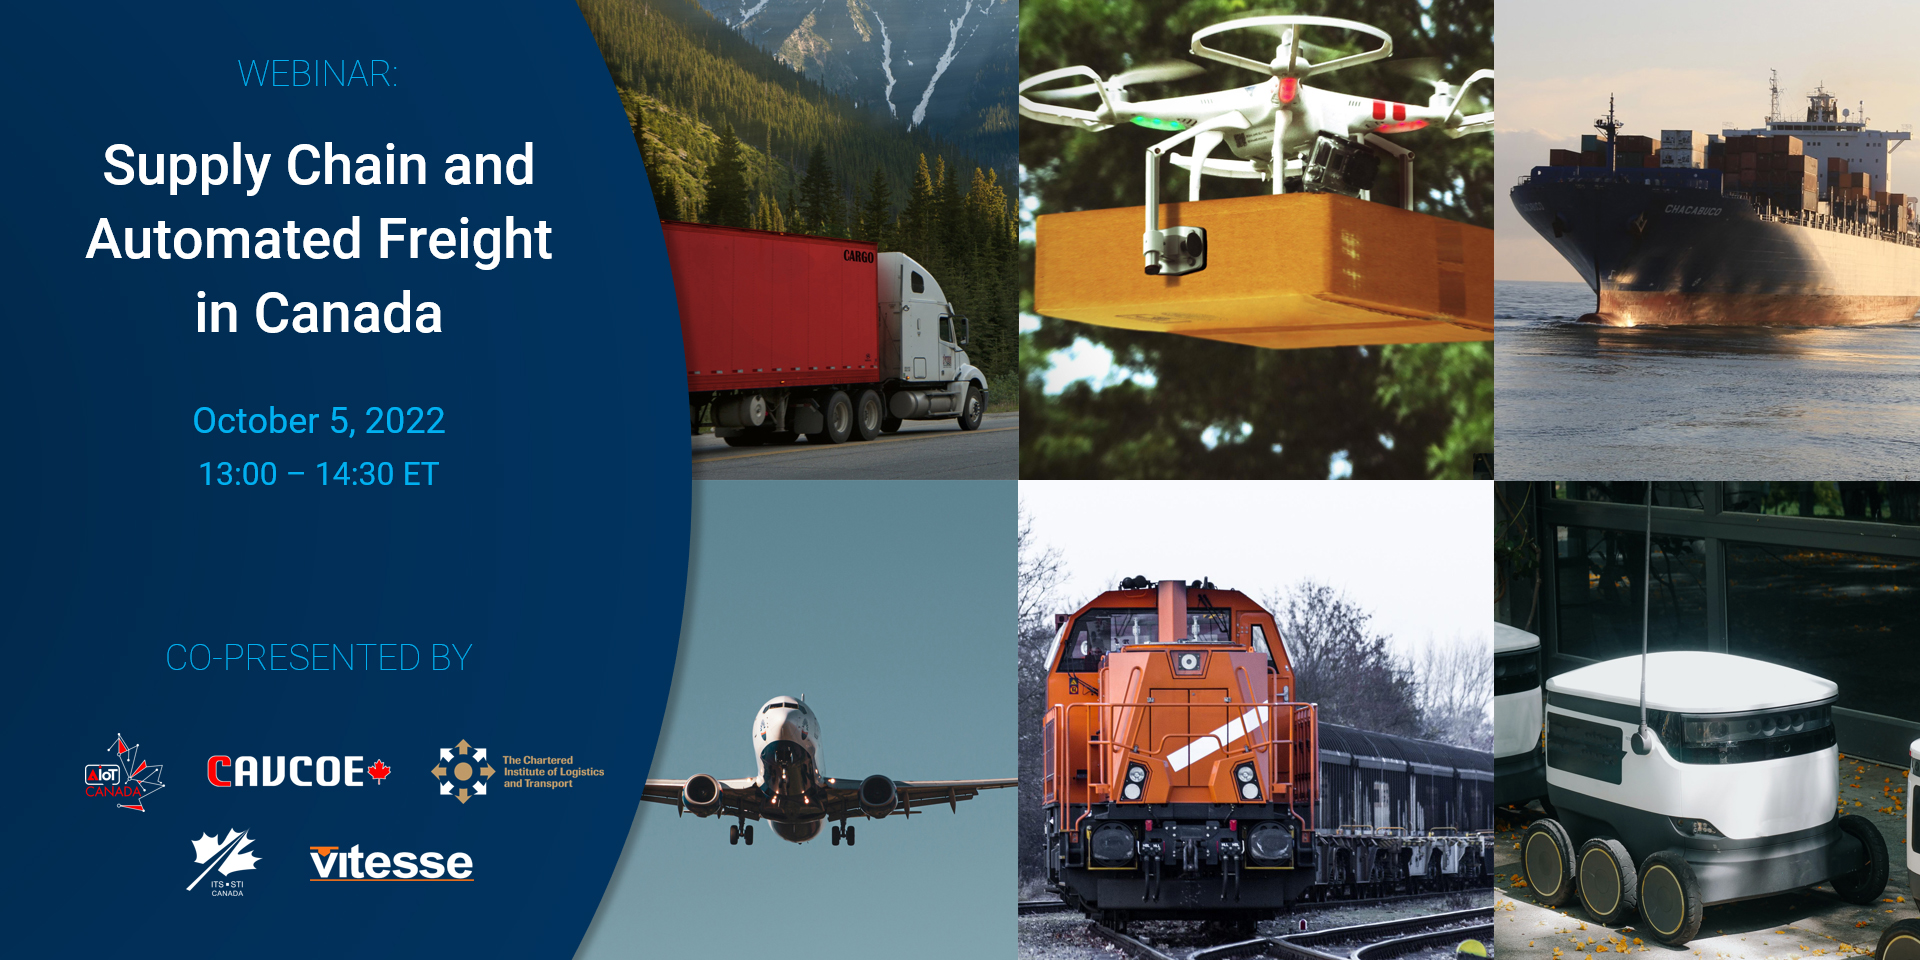 Mark your calendar & register! Webinar: Supply Chain and Automated Freight in Canada - Sponsored by: CAVCOE & Praxiem